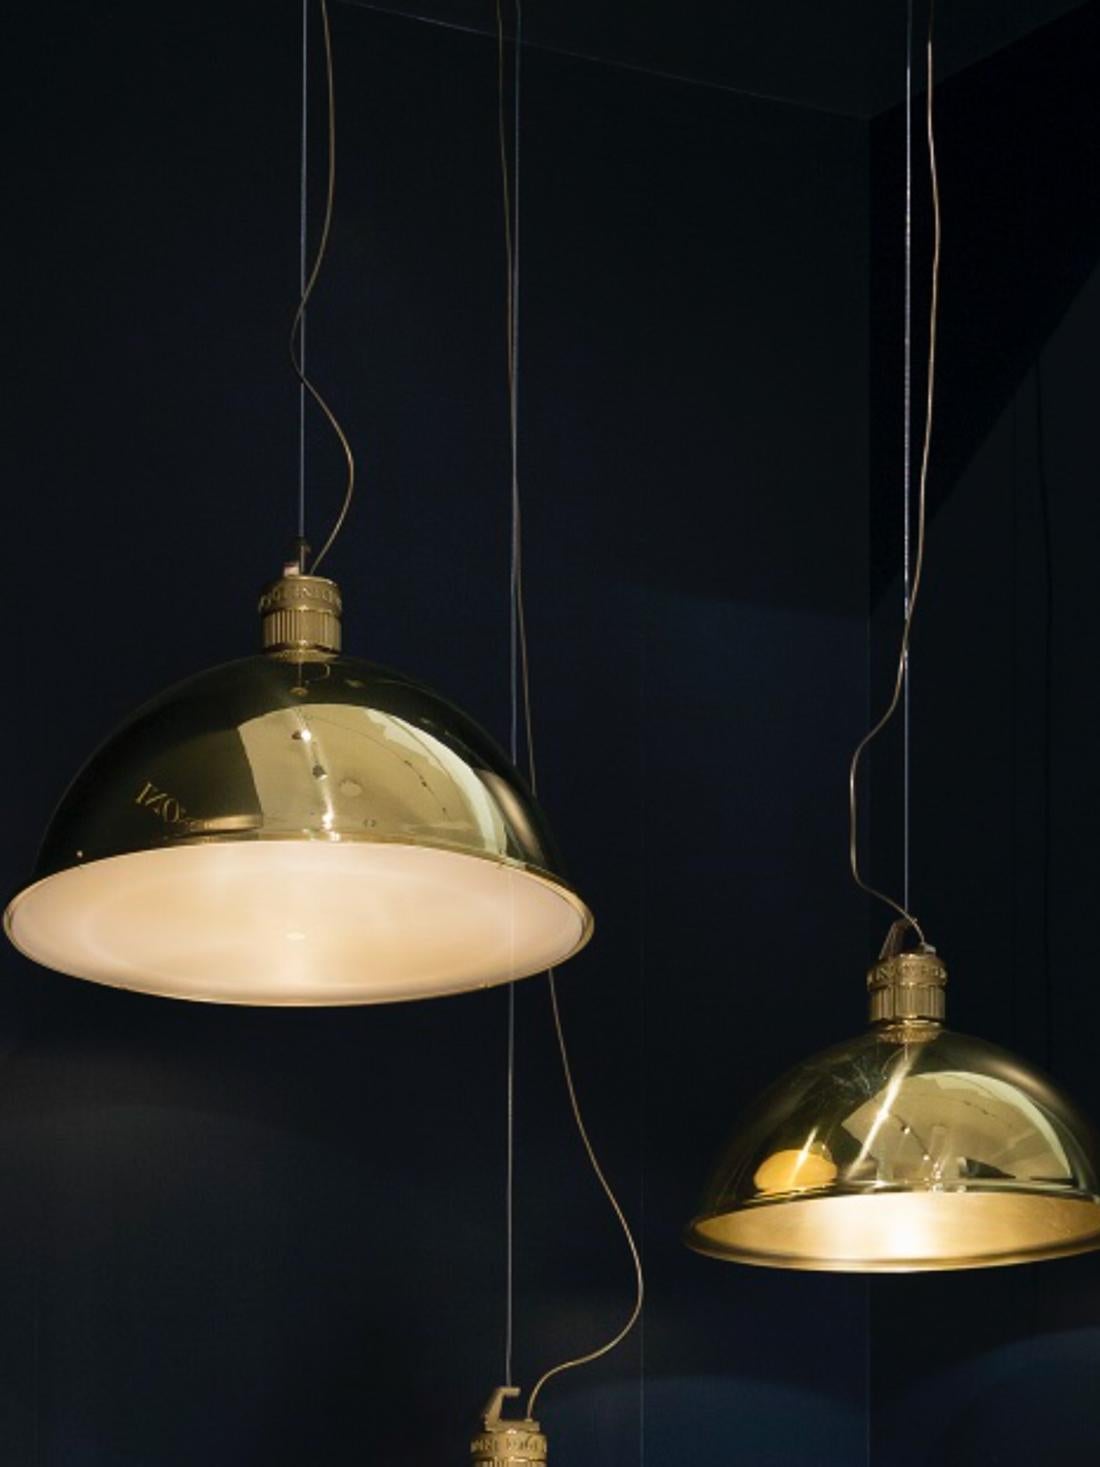 This beautiful Ghidini 1961 contemporary suspension lamp is designed by the Italian Elisa Giovannoni and it is the result of the meeting between the highest Italian quality manufacturing in brass and the iconic international design.
The brand